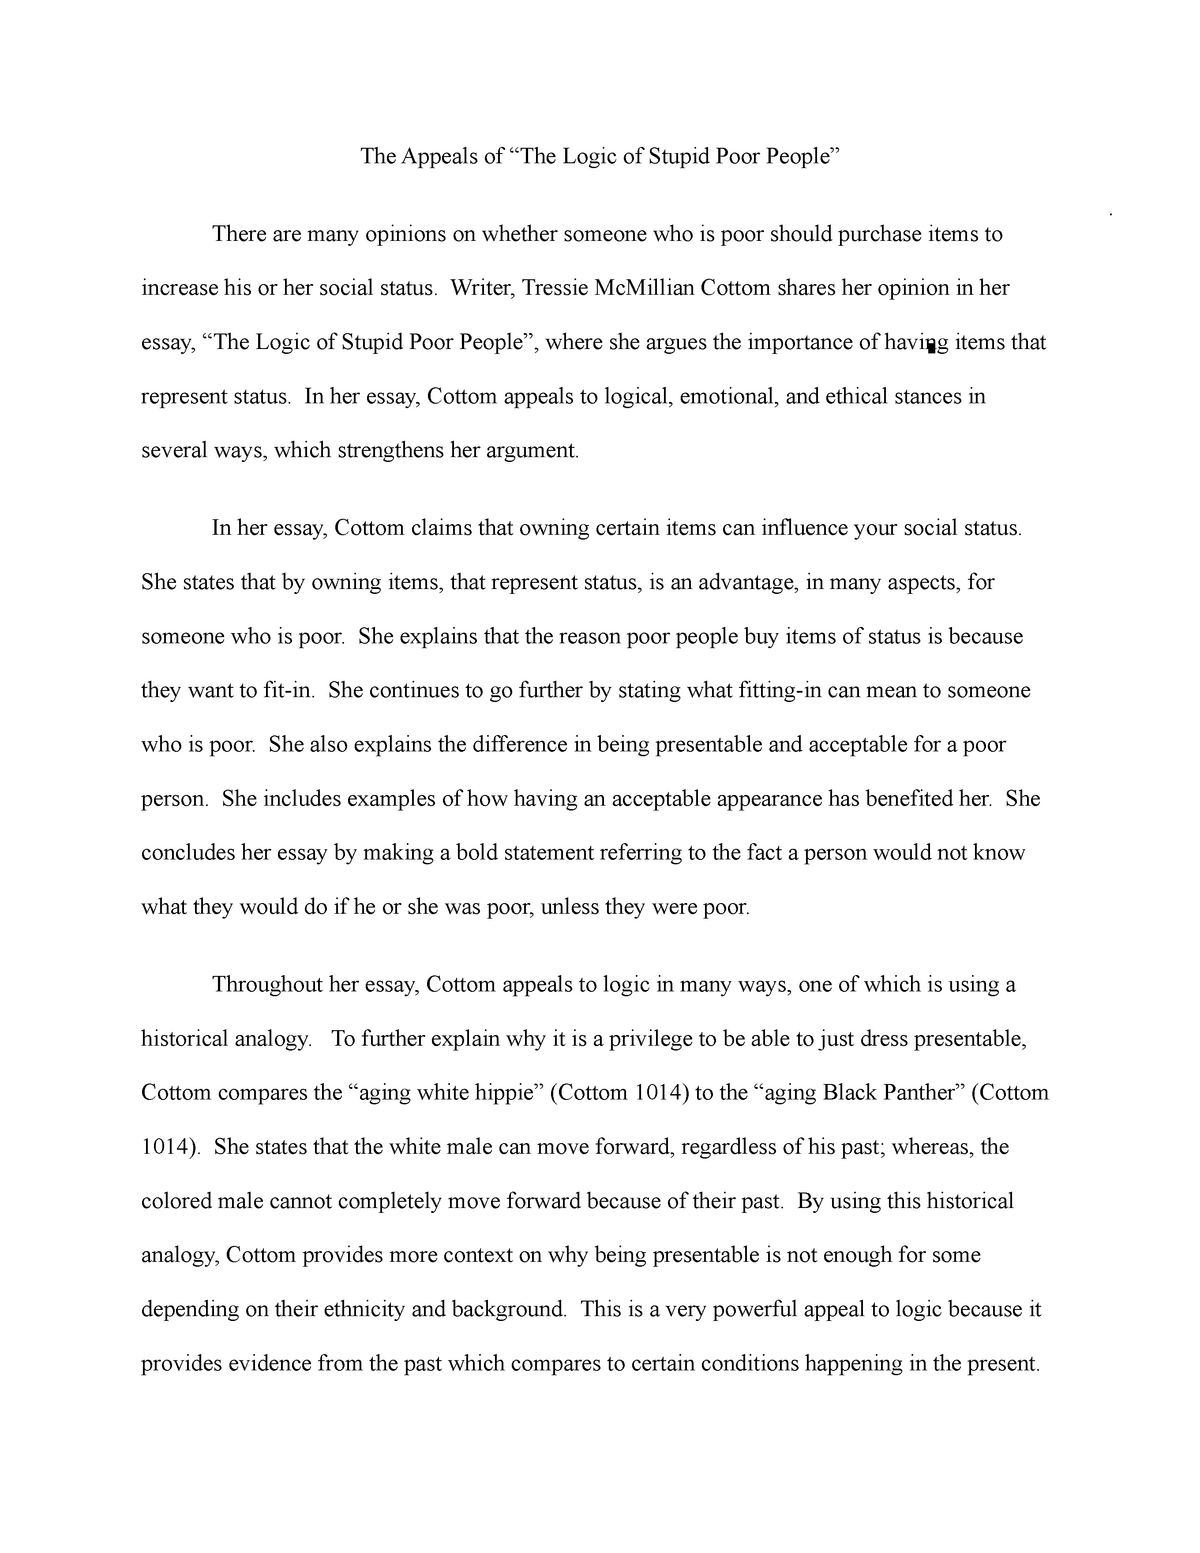 Rhetorical Analysis Rough Draft - The Appeals of “The Logic of